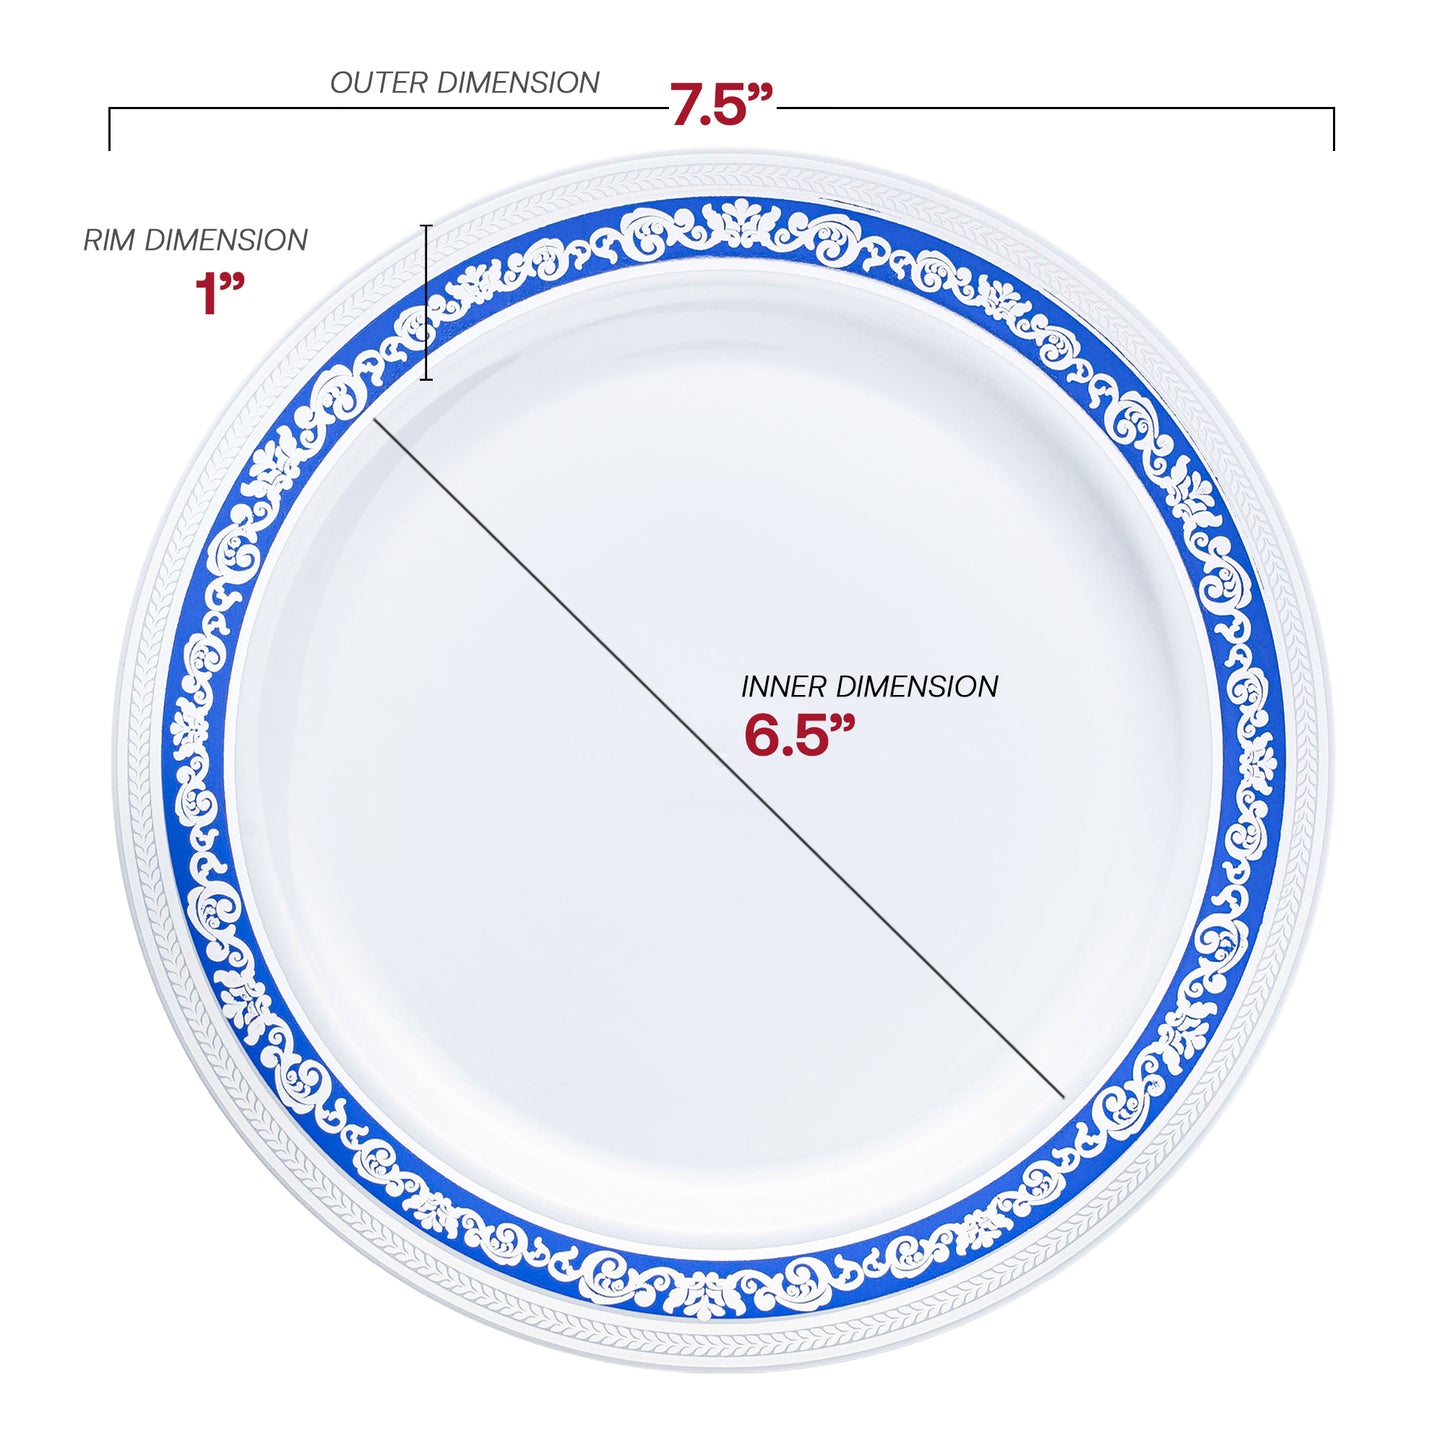 White with Blue and Silver Royal Rim Plastic Appetizer/Salad Plates (7.5") Dimension | The Kaya Collection